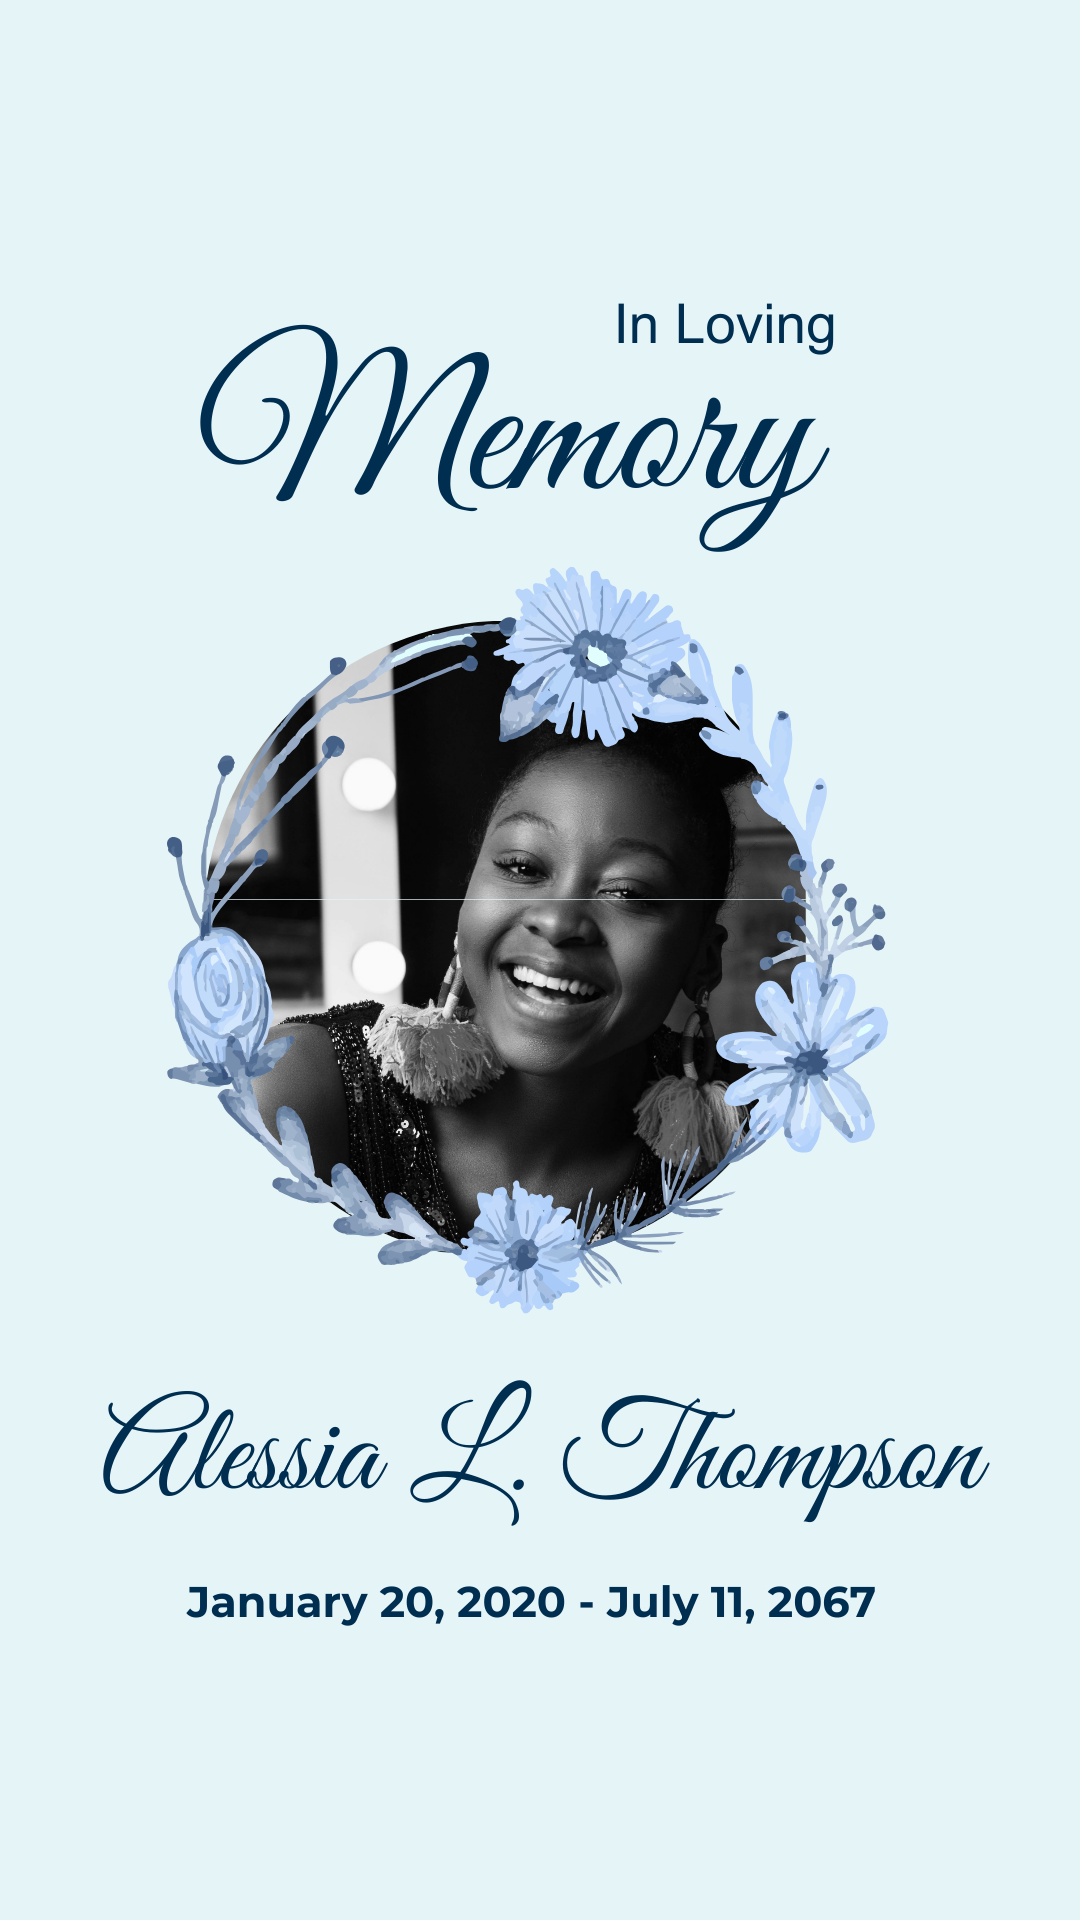 Obituary sympathy message Template